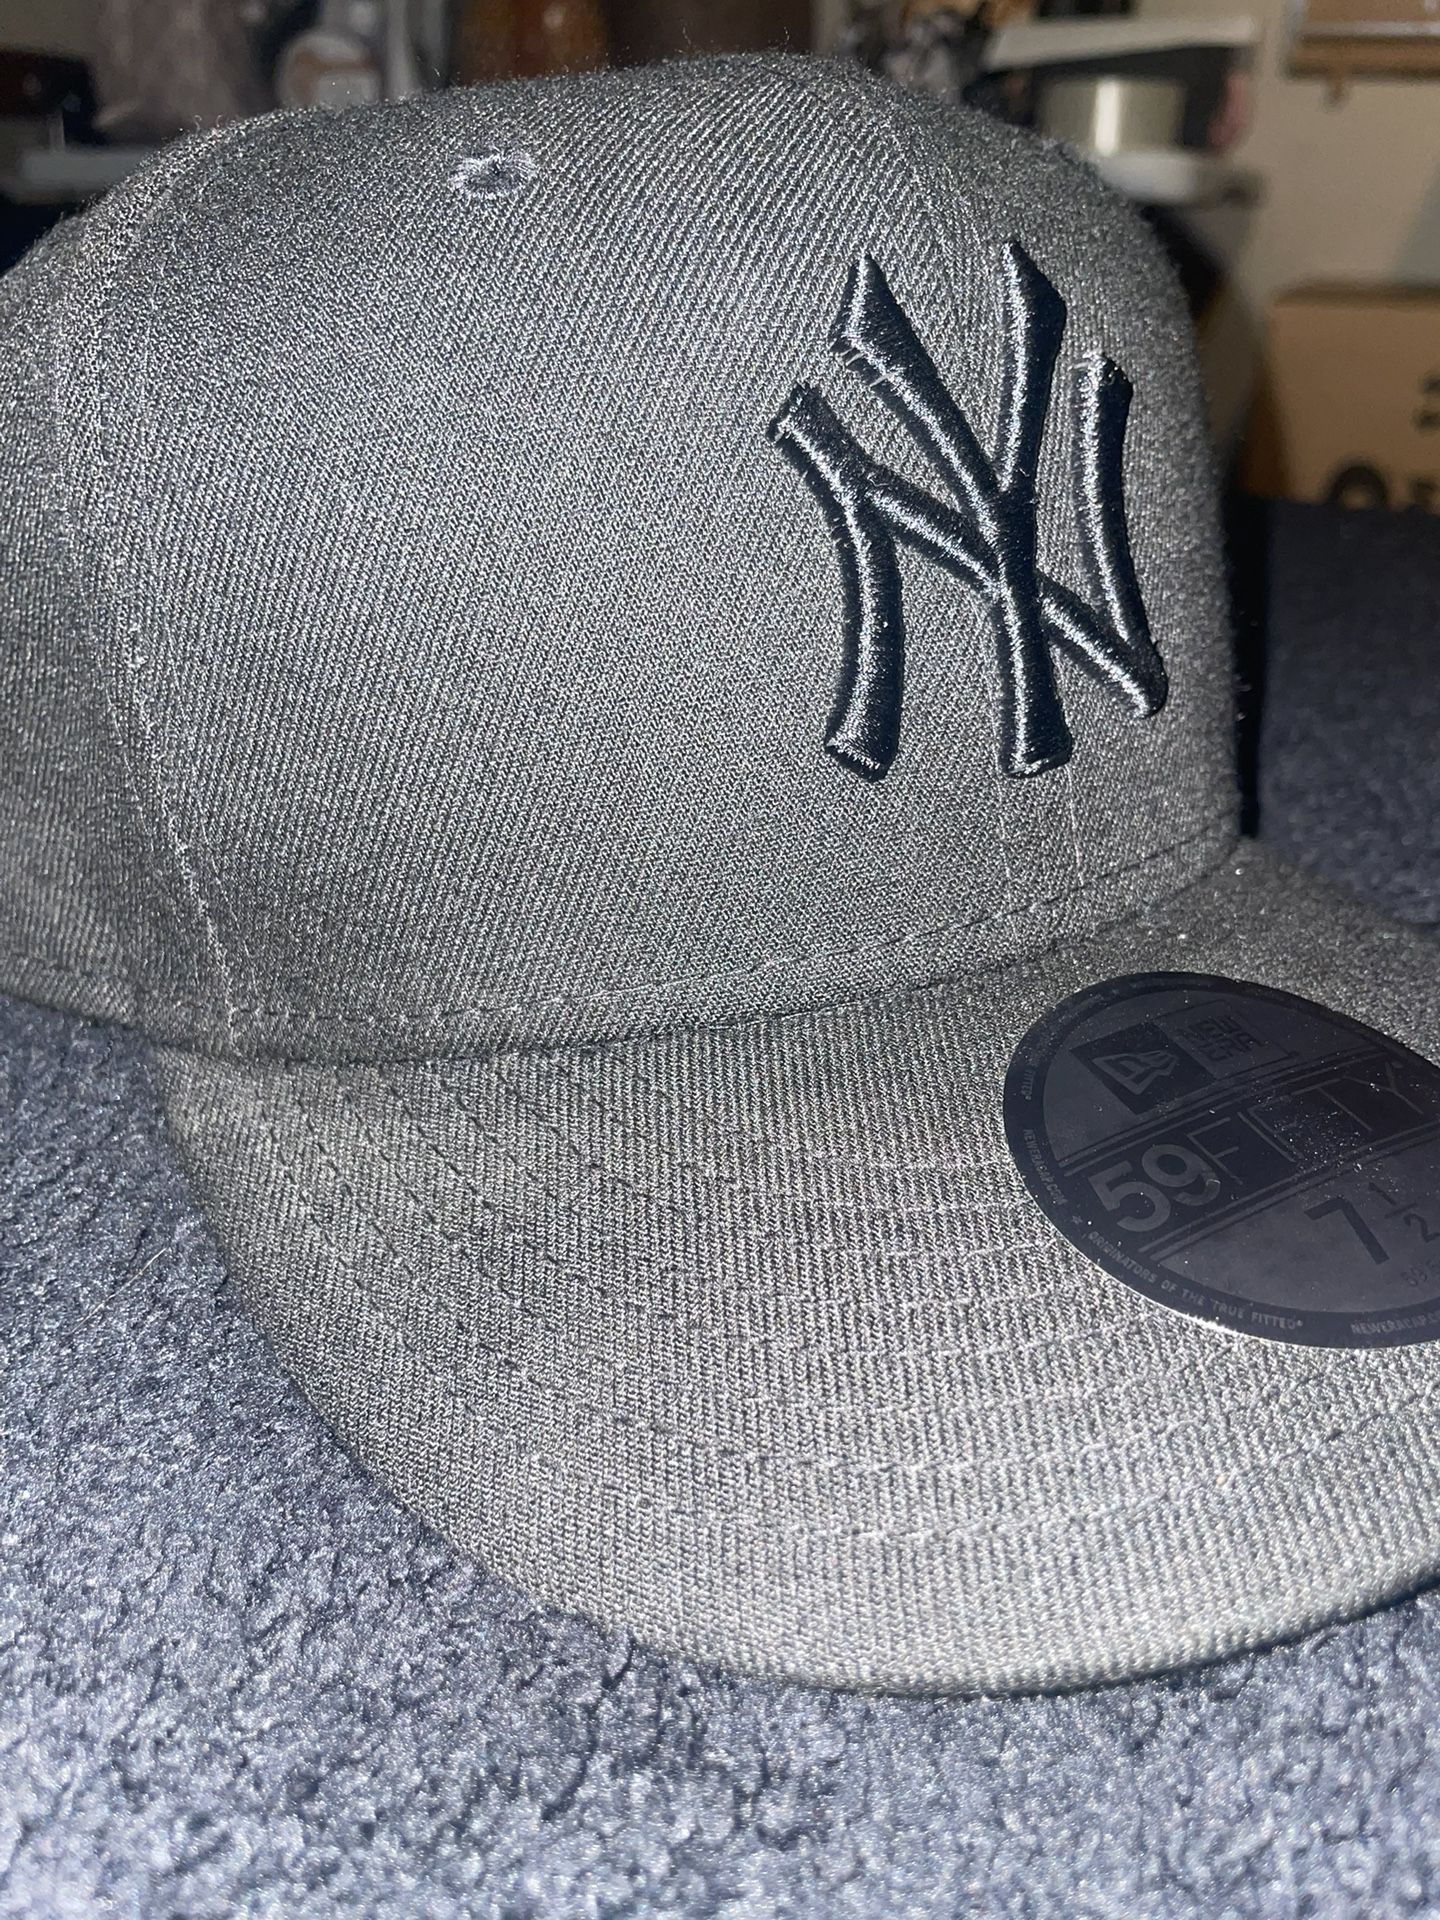 USED 59FIFTY 7 1/2 Black  New York Yankees Hat